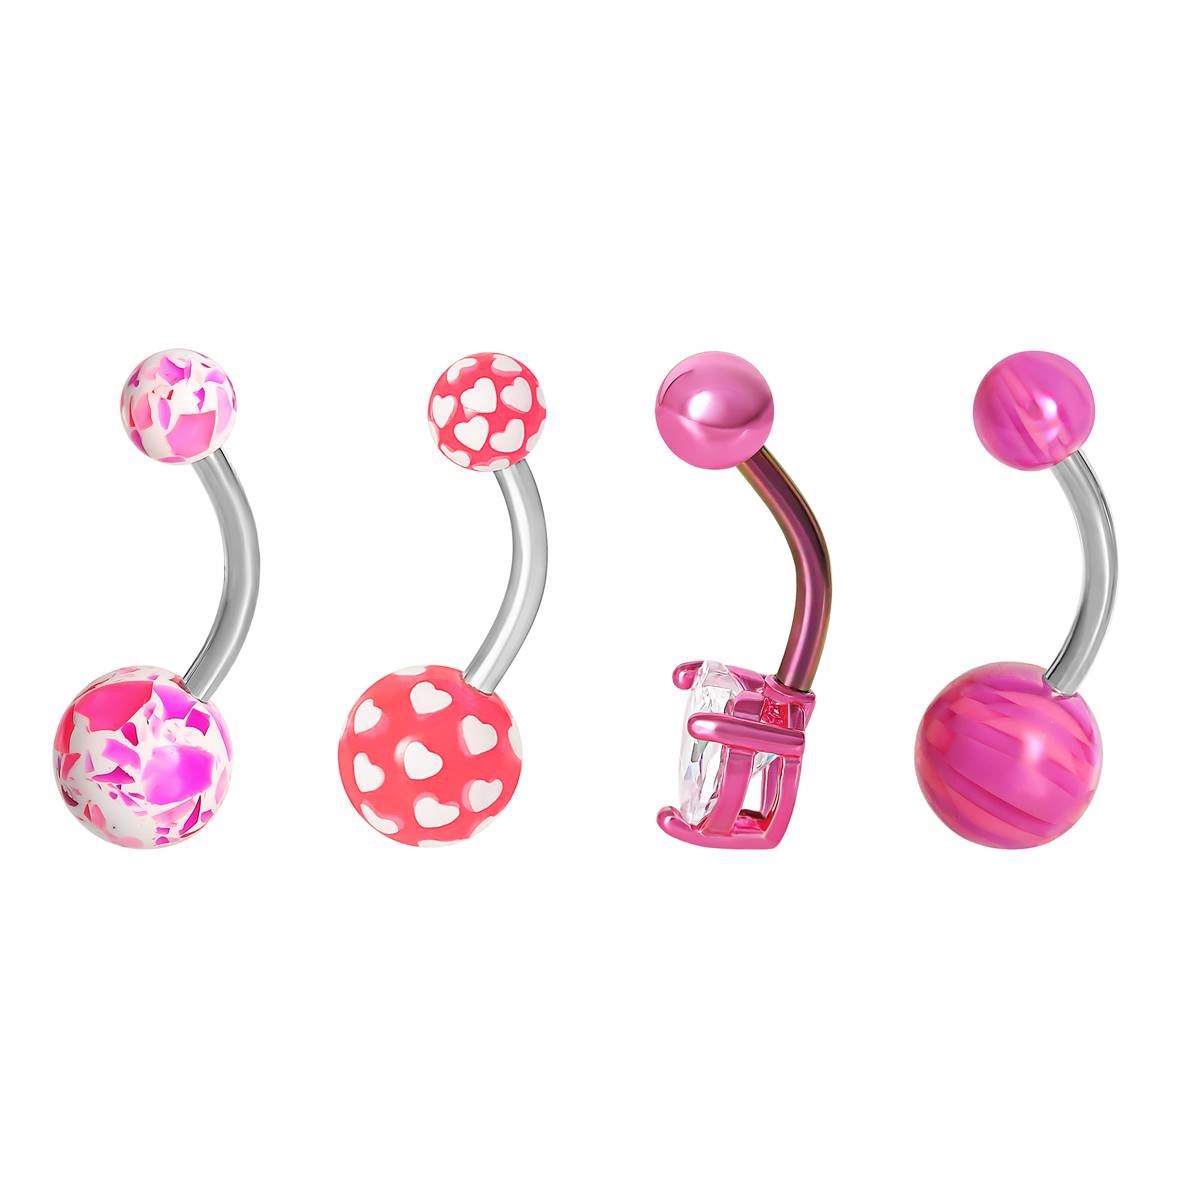 14 Gauge Stainless Steel 4pc. Belly Ring Set